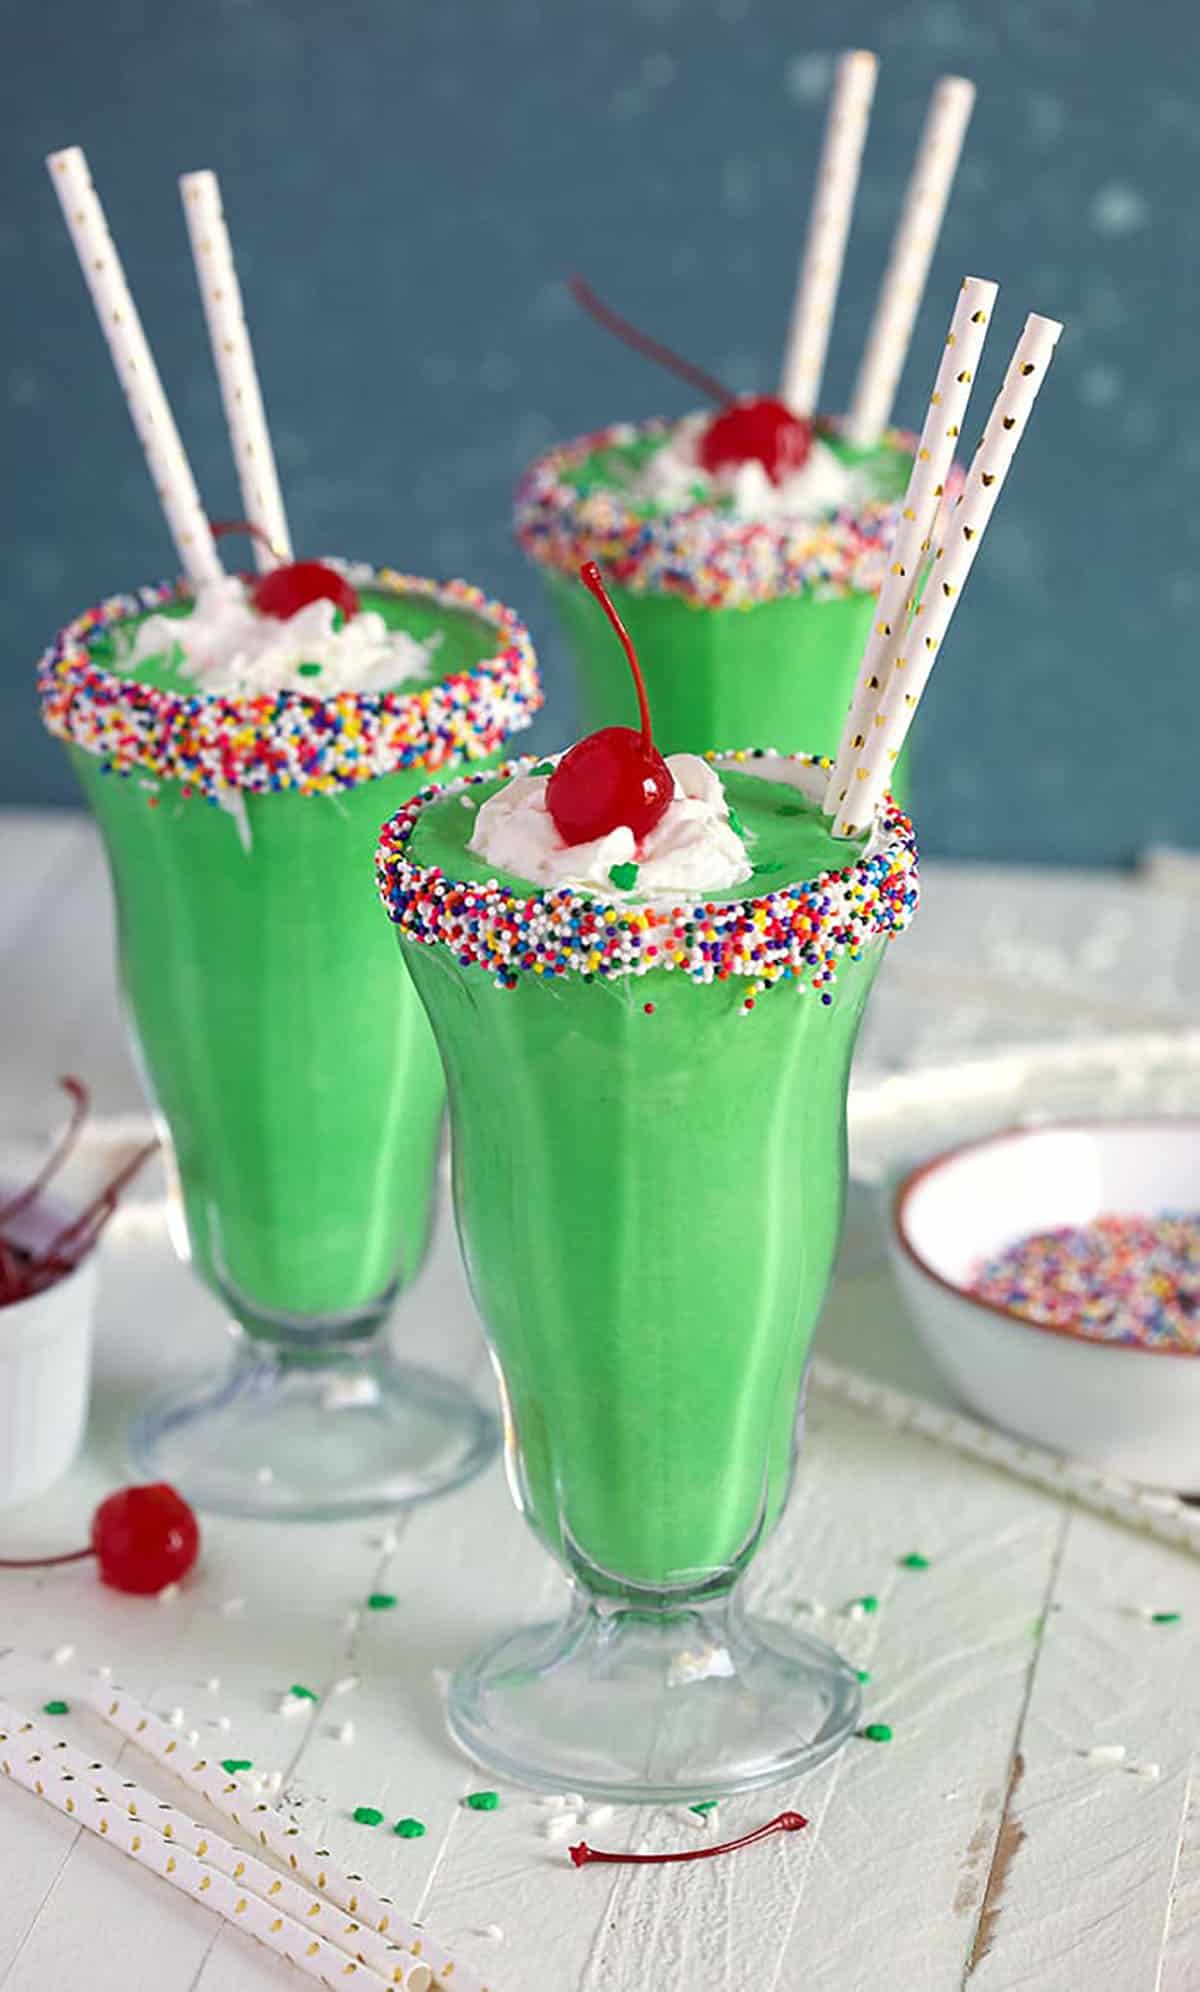 Three shamrock shake milkshakes in glasses with paper straws on a white board with a blue background.